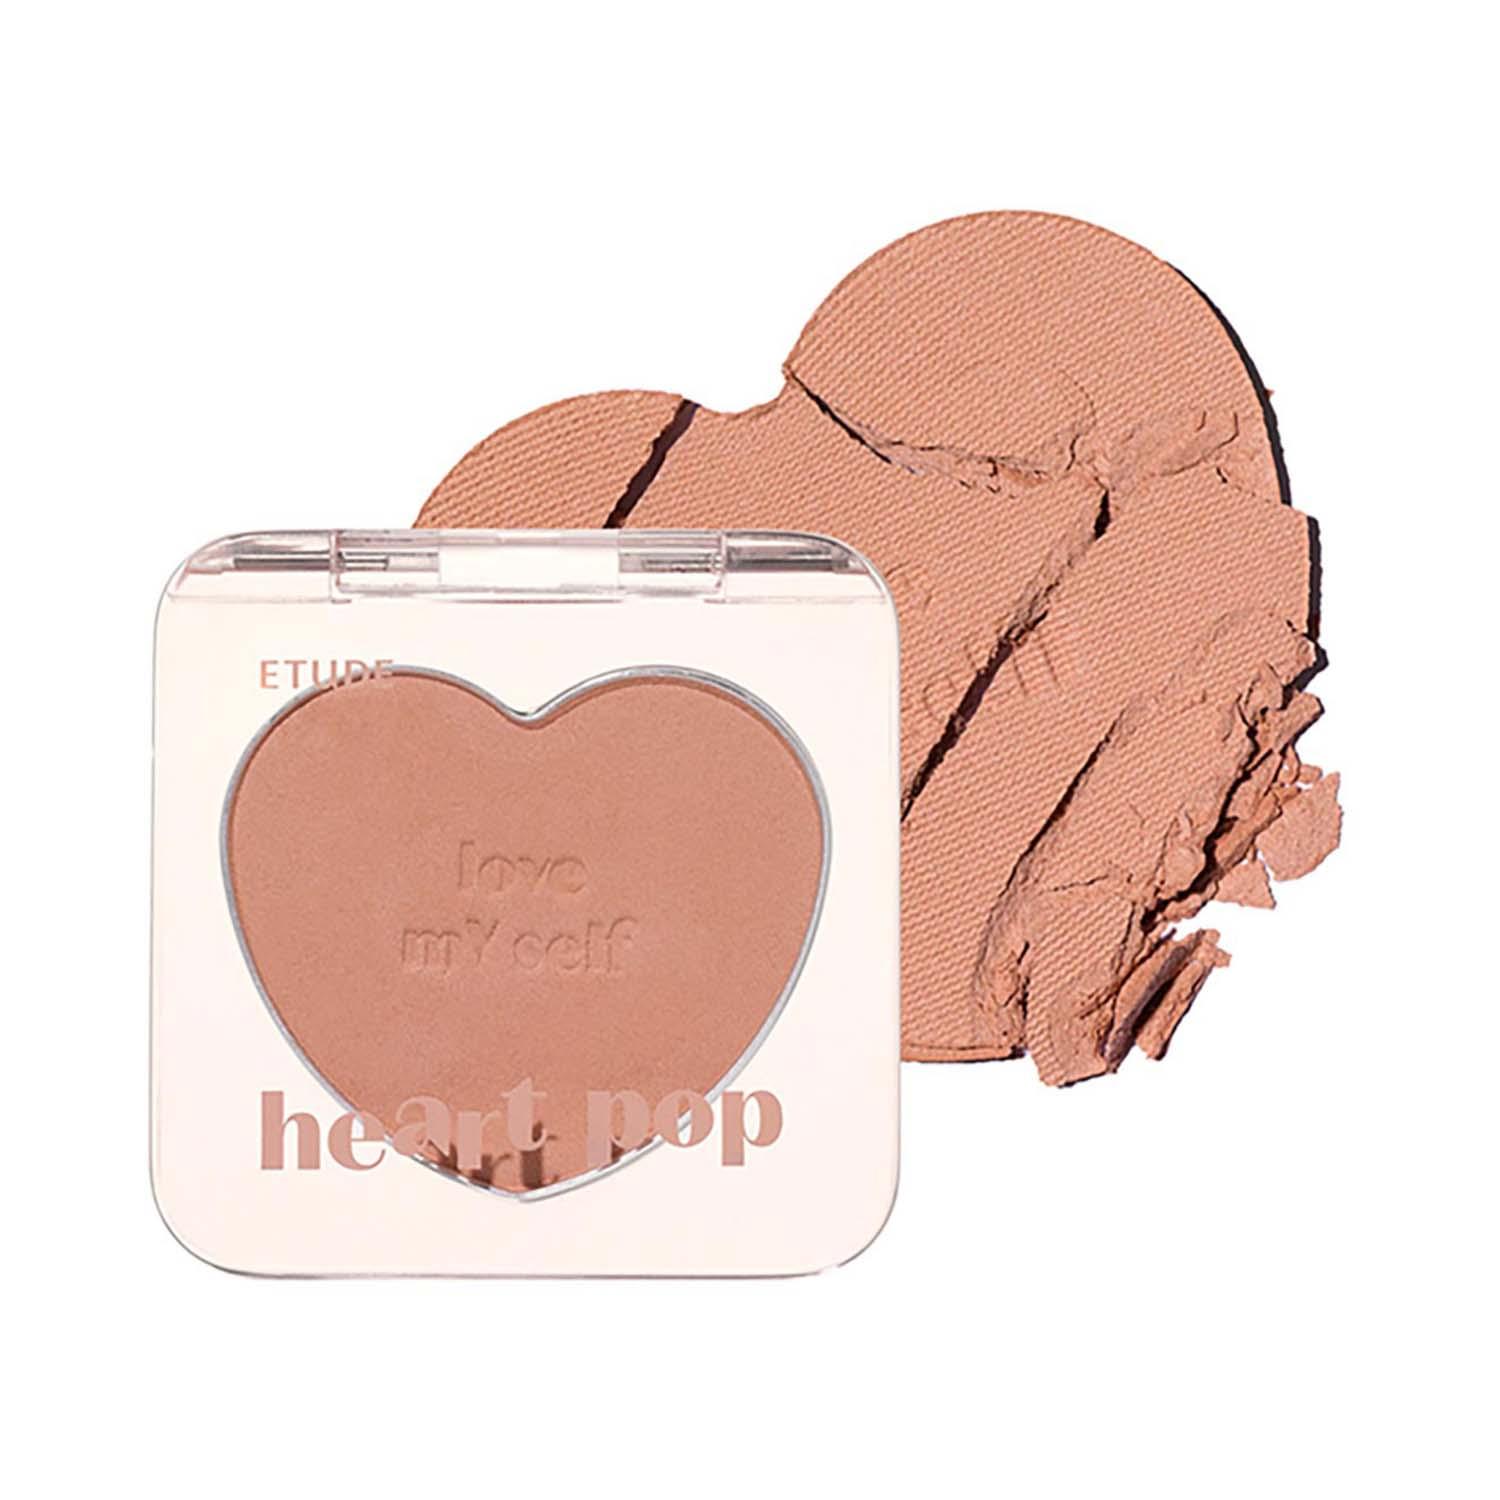 ETUDE HOUSE | ETUDE HOUSE Heart Pop Blusher - Born to be Chic (3.3 g)